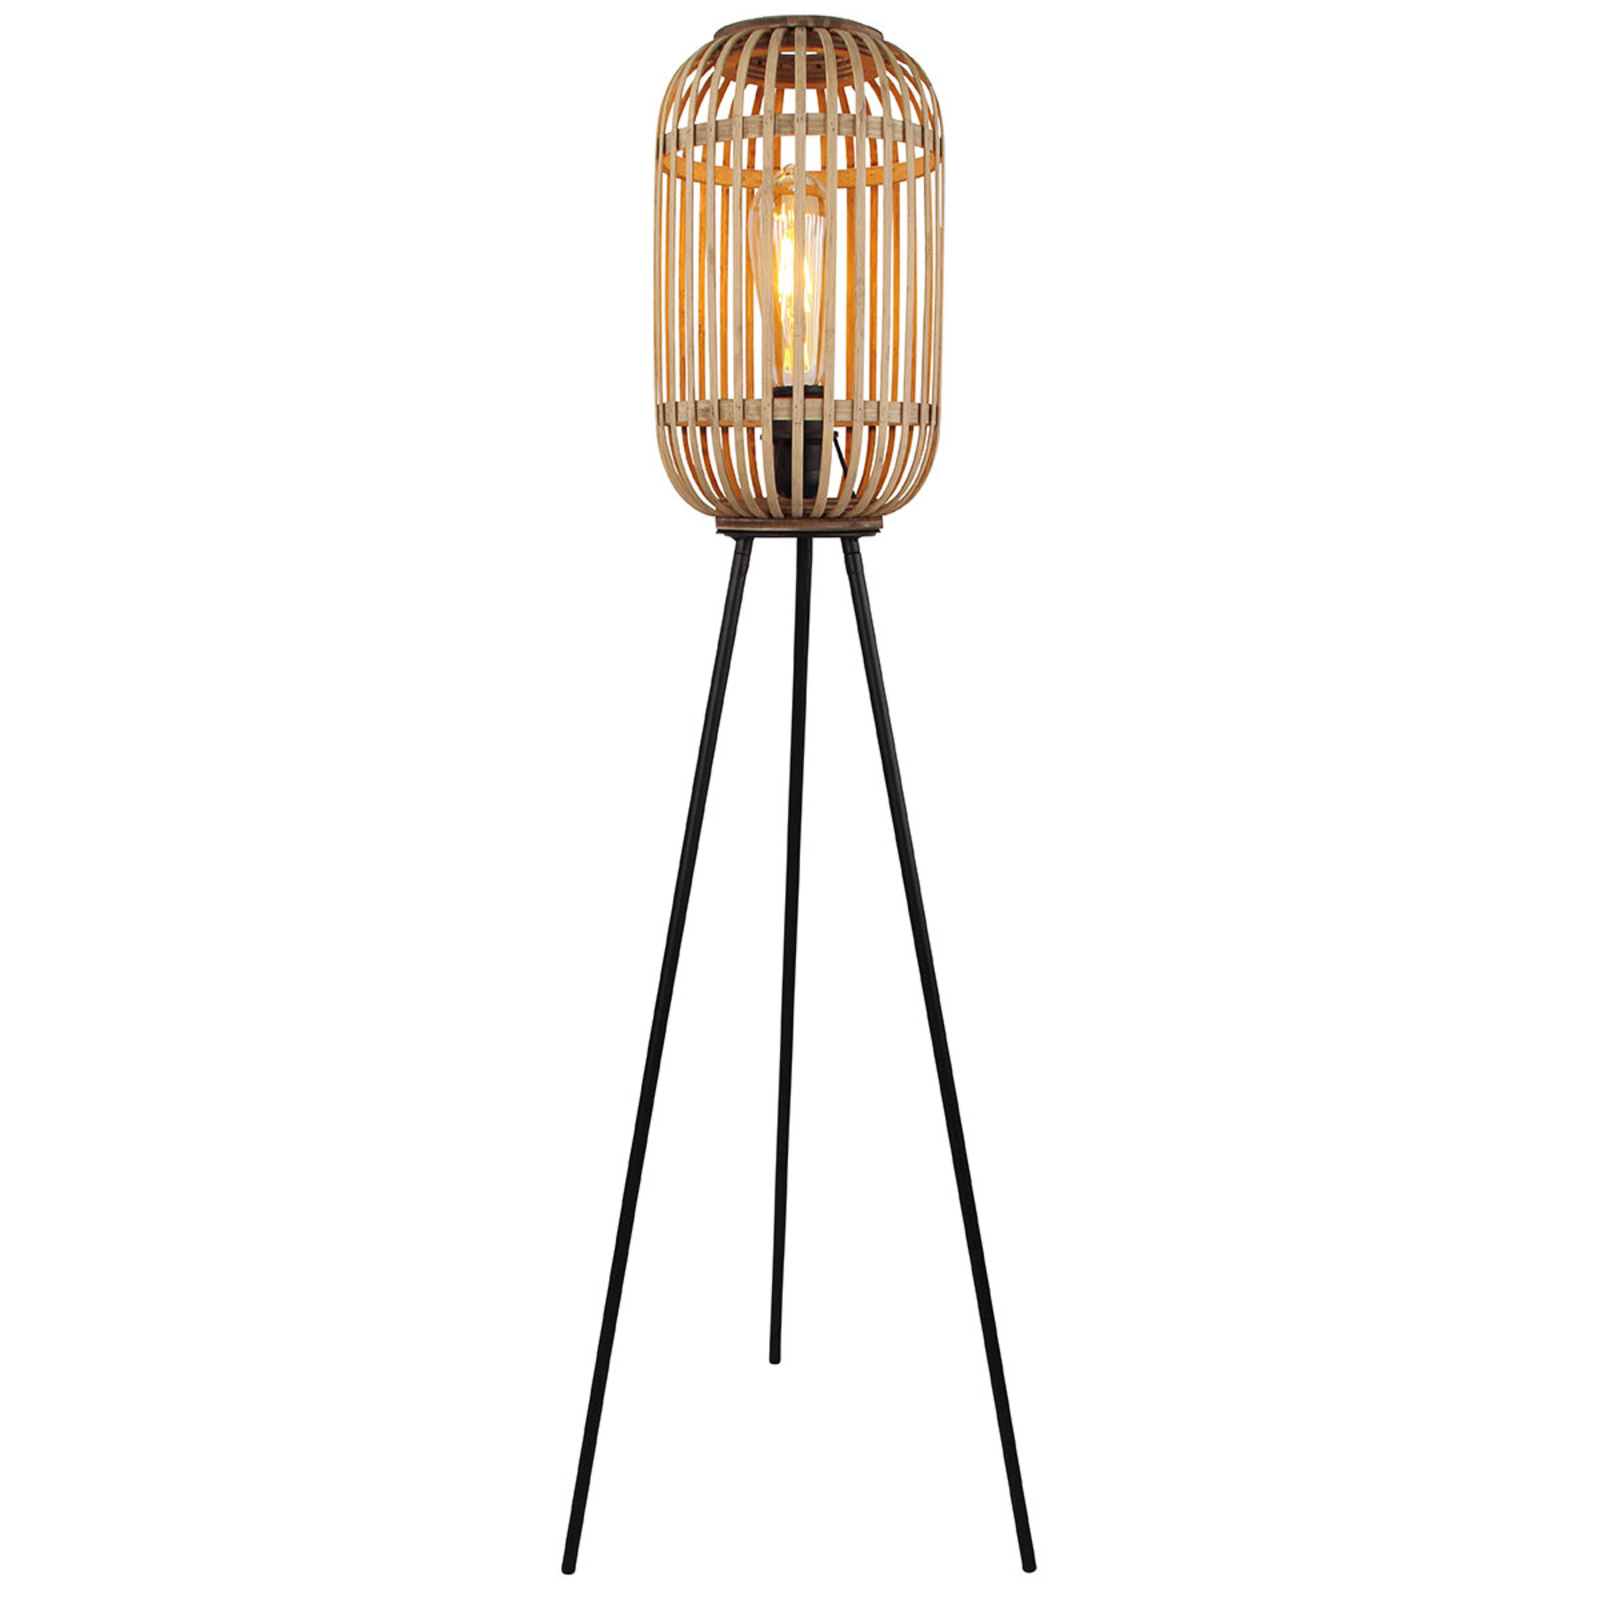 Floor lamp Malacca with wooden shade